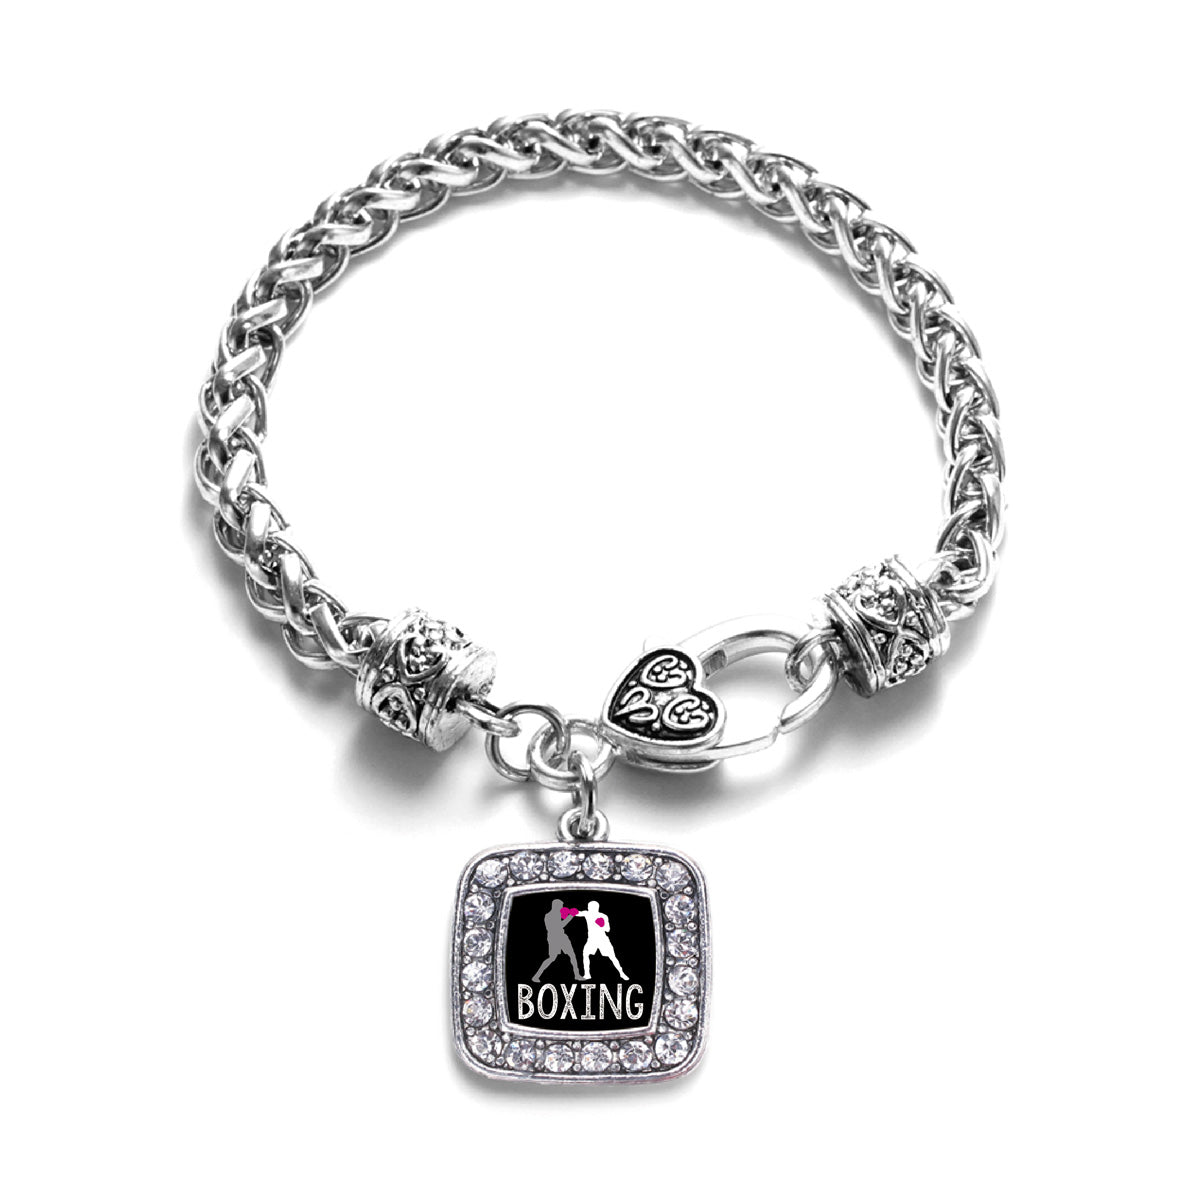 Silver Boxing Square Charm Braided Bracelet